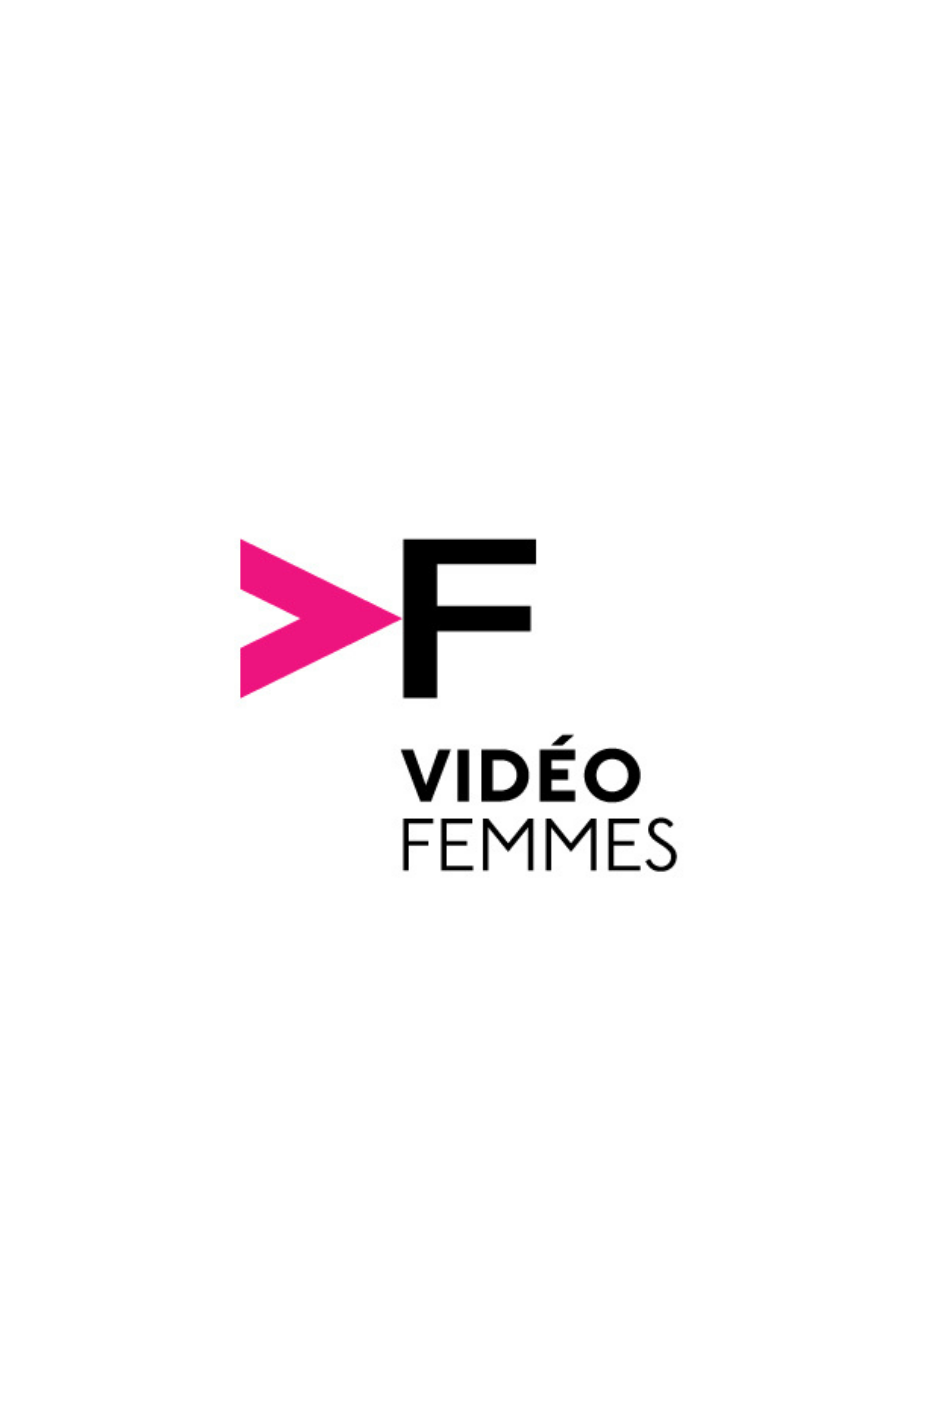 images/bottin_films/f4adbed3bf8790a62e26a30683c6a2d2-Films-Video-Femmes.png#joomlaImage://local-images/bottin_films/f4adbed3bf8790a62e26a30683c6a2d2-Films-Video-Femmes.png?width=948&height=1410